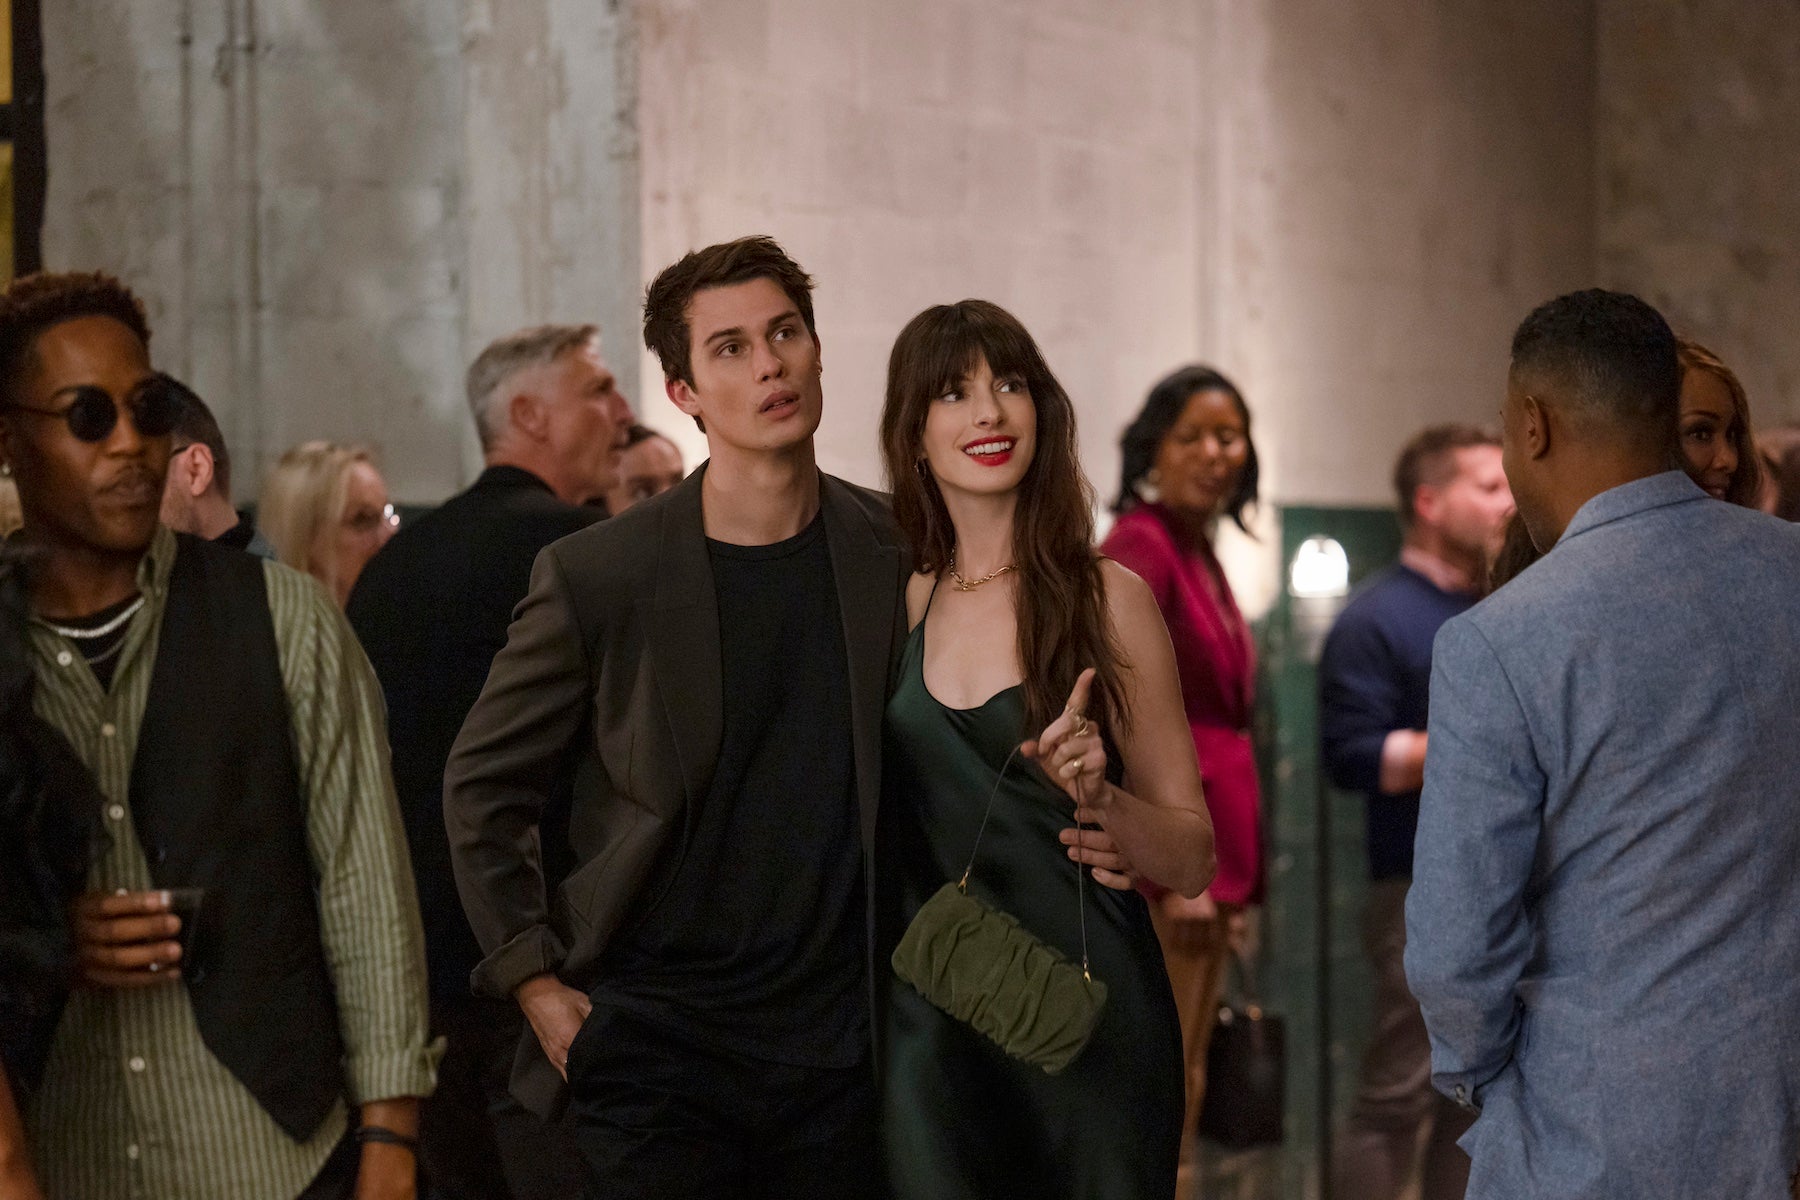 Still from 'The Idea of You' featuring Anne Hathaway and Nicholas Galitzine at a formal gathering